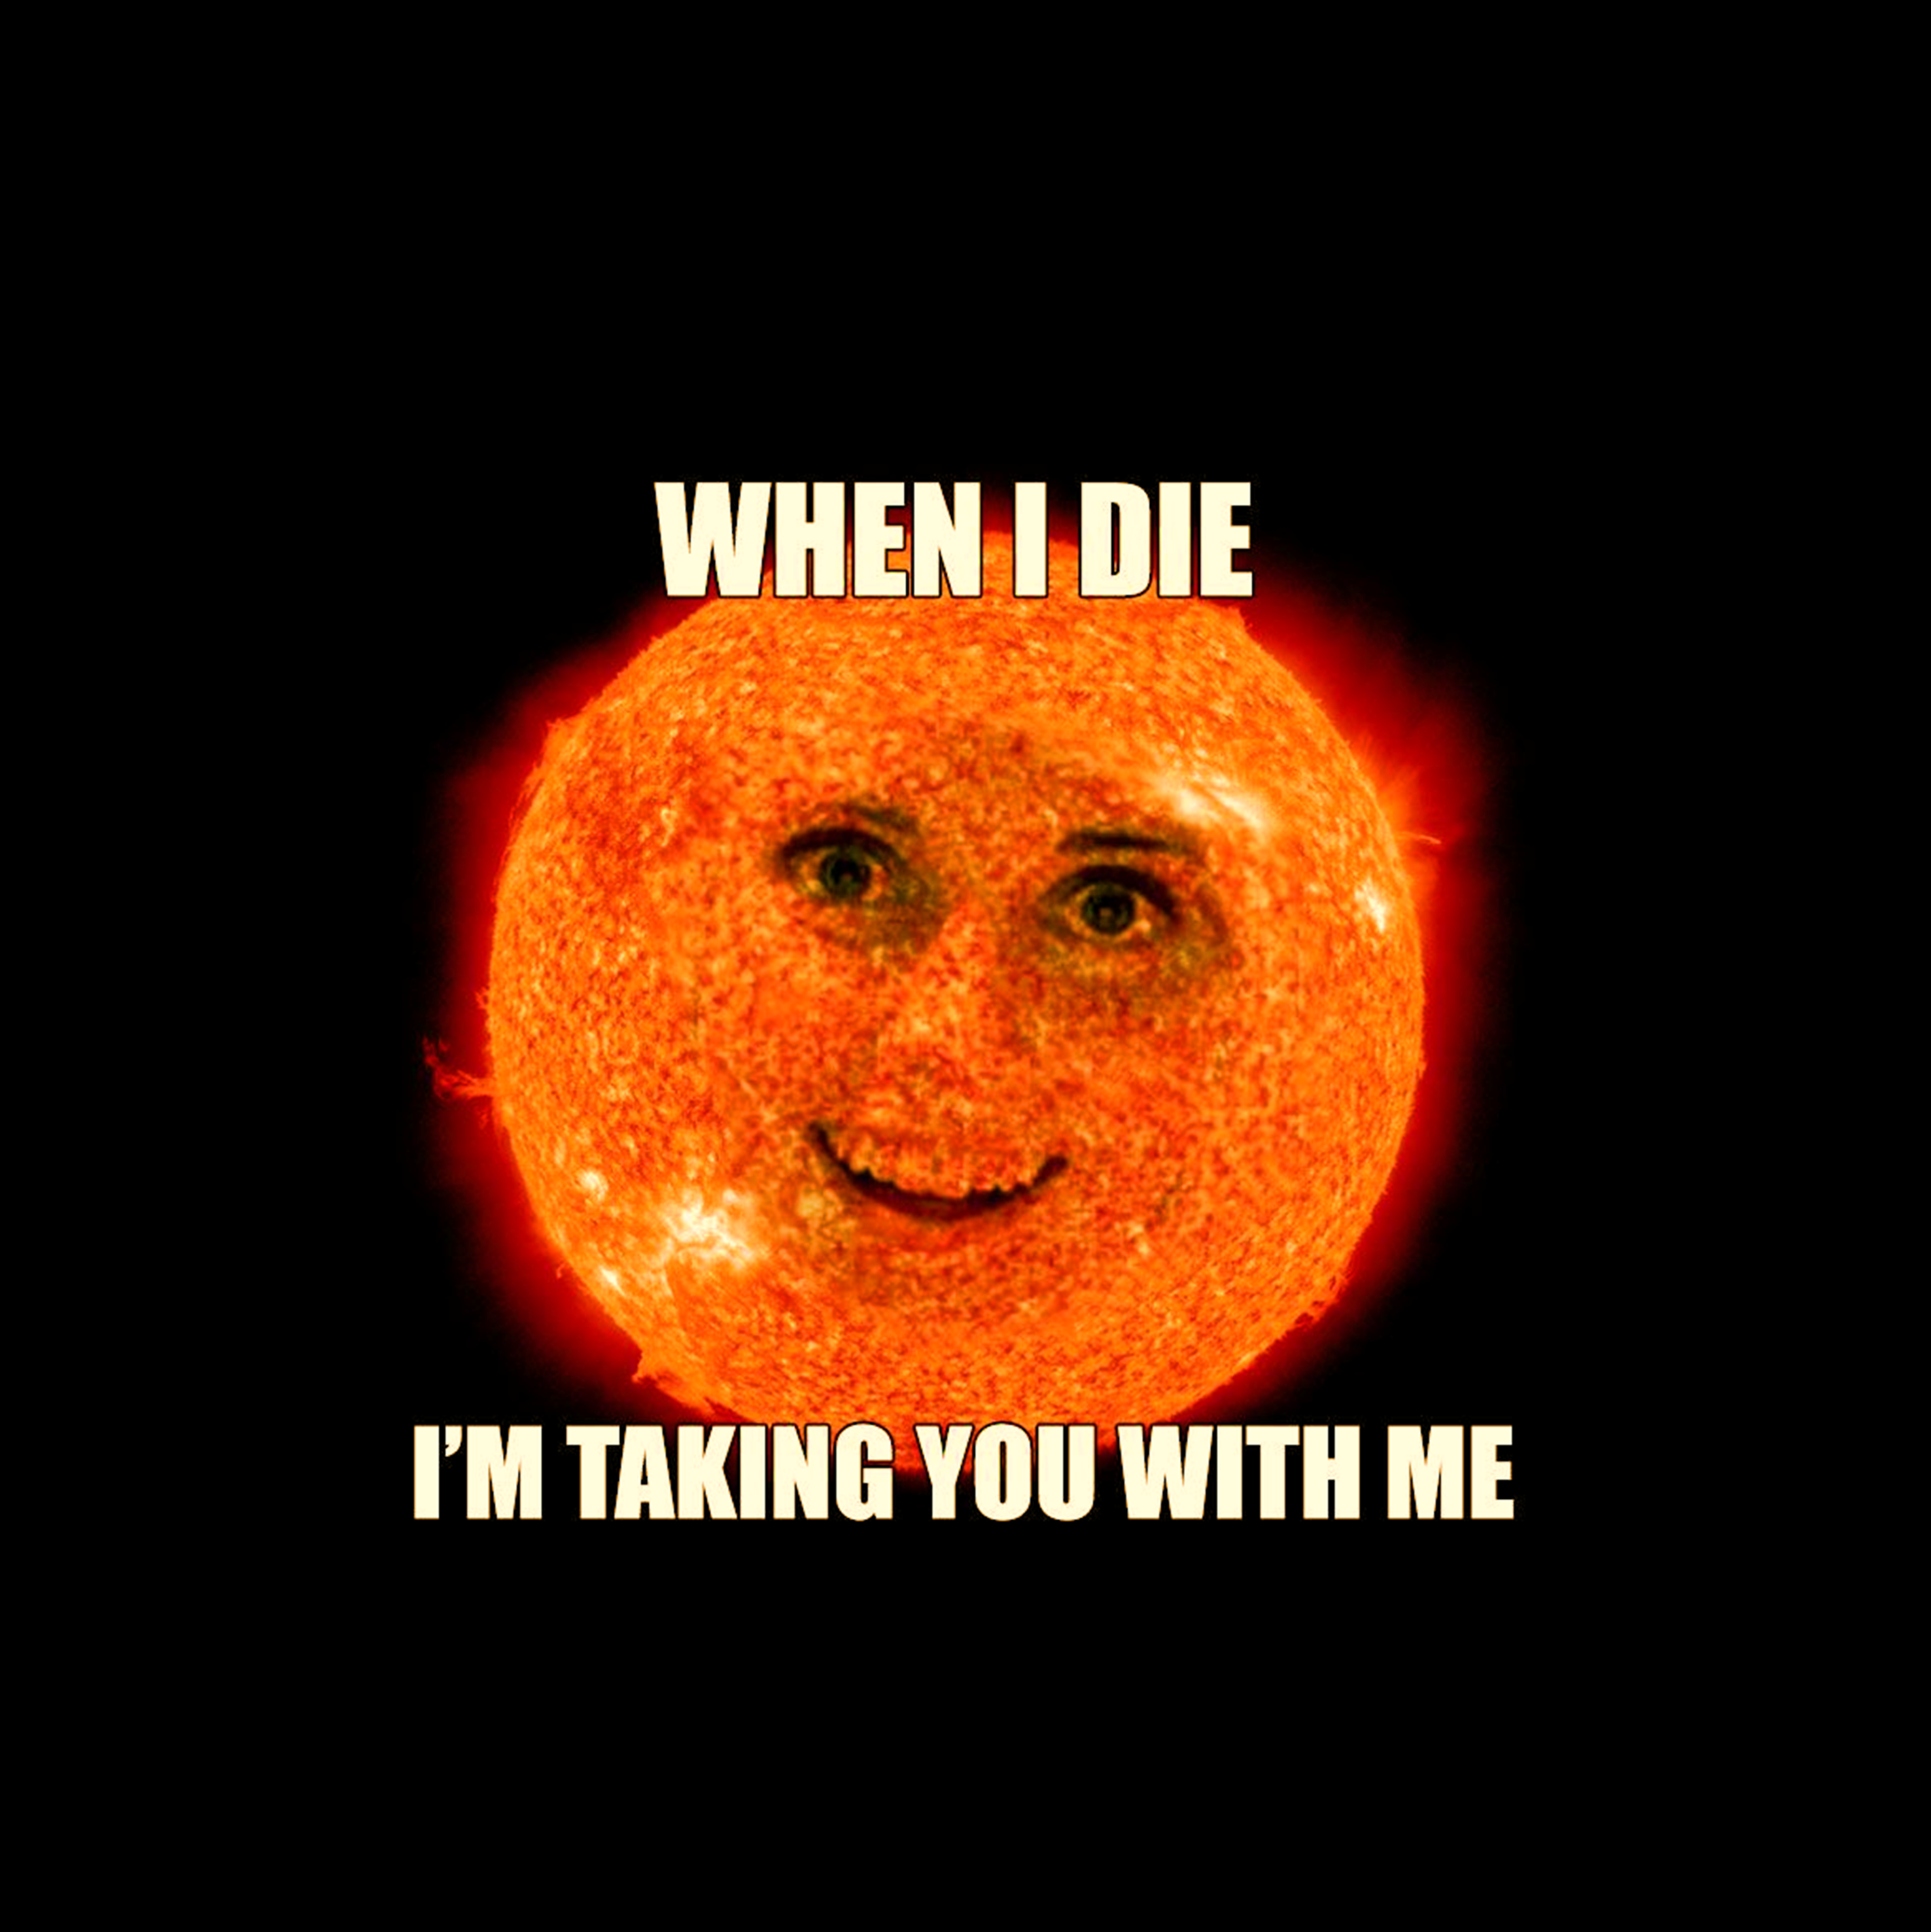 The Fking sun.png